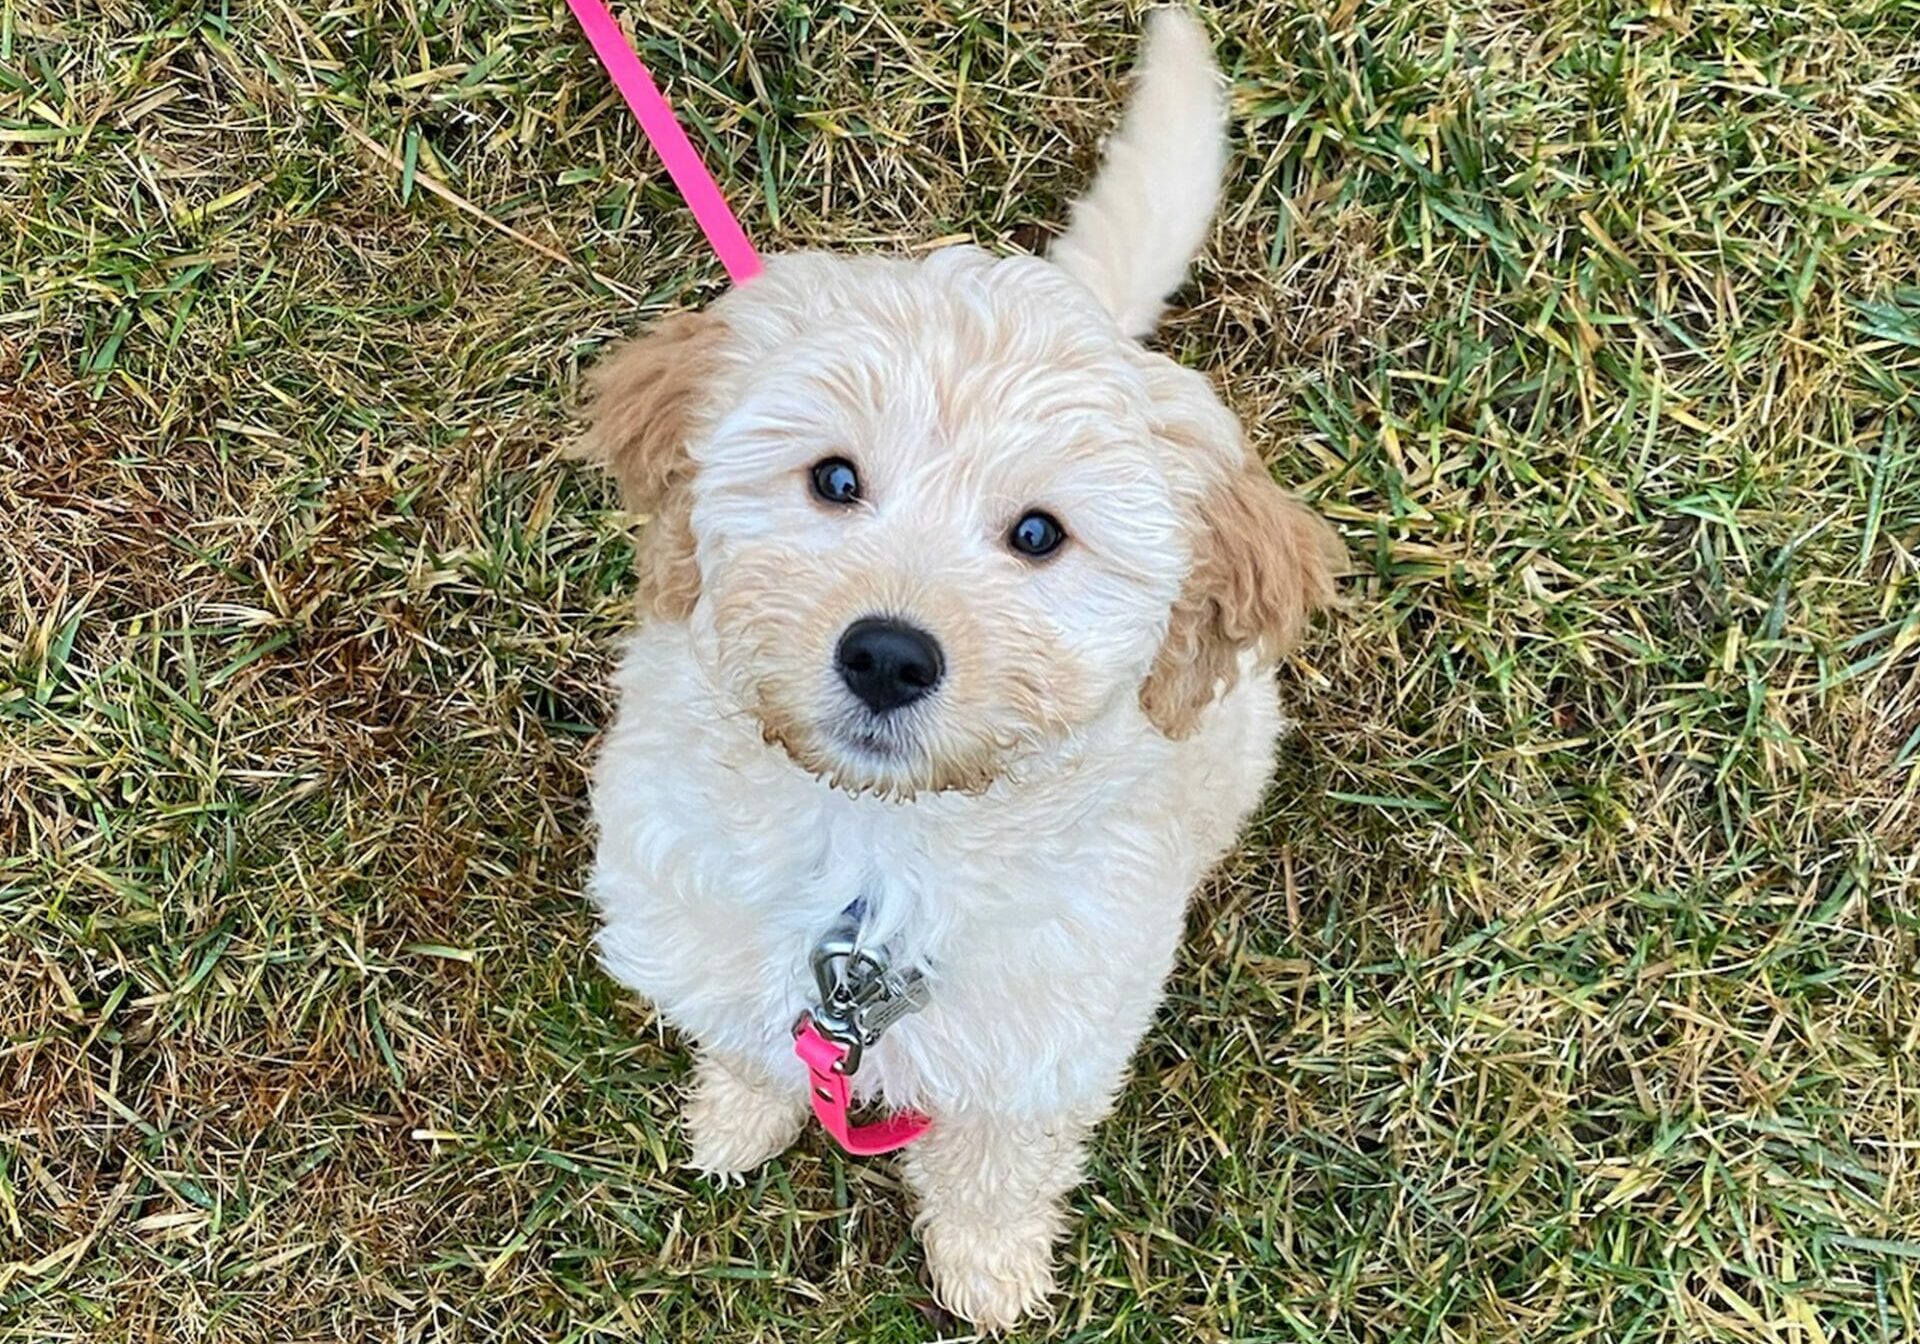 Potty training a Goldendoodle puppy